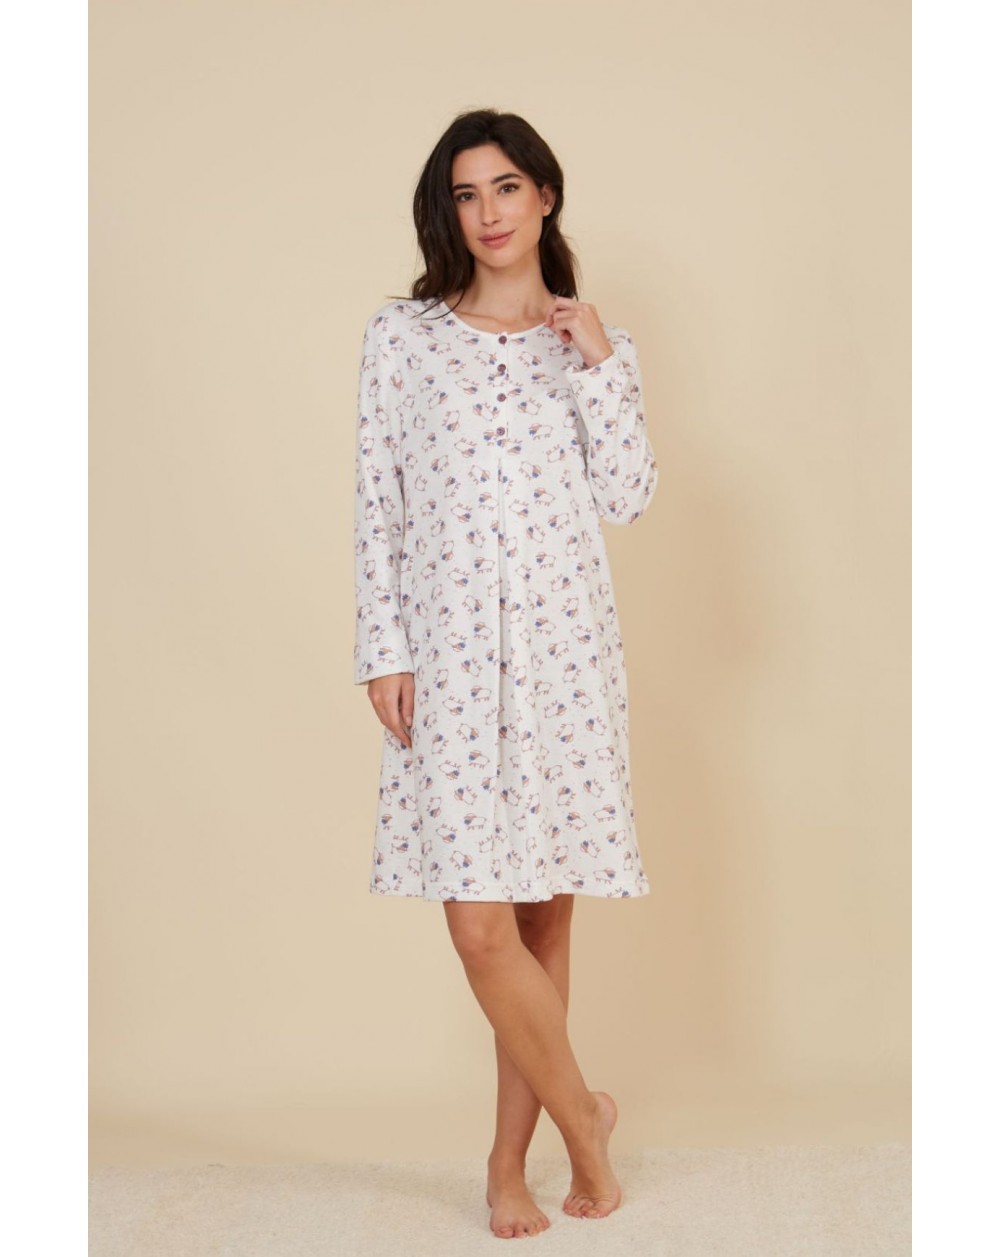 Women's nightgown with sheep and buttons 